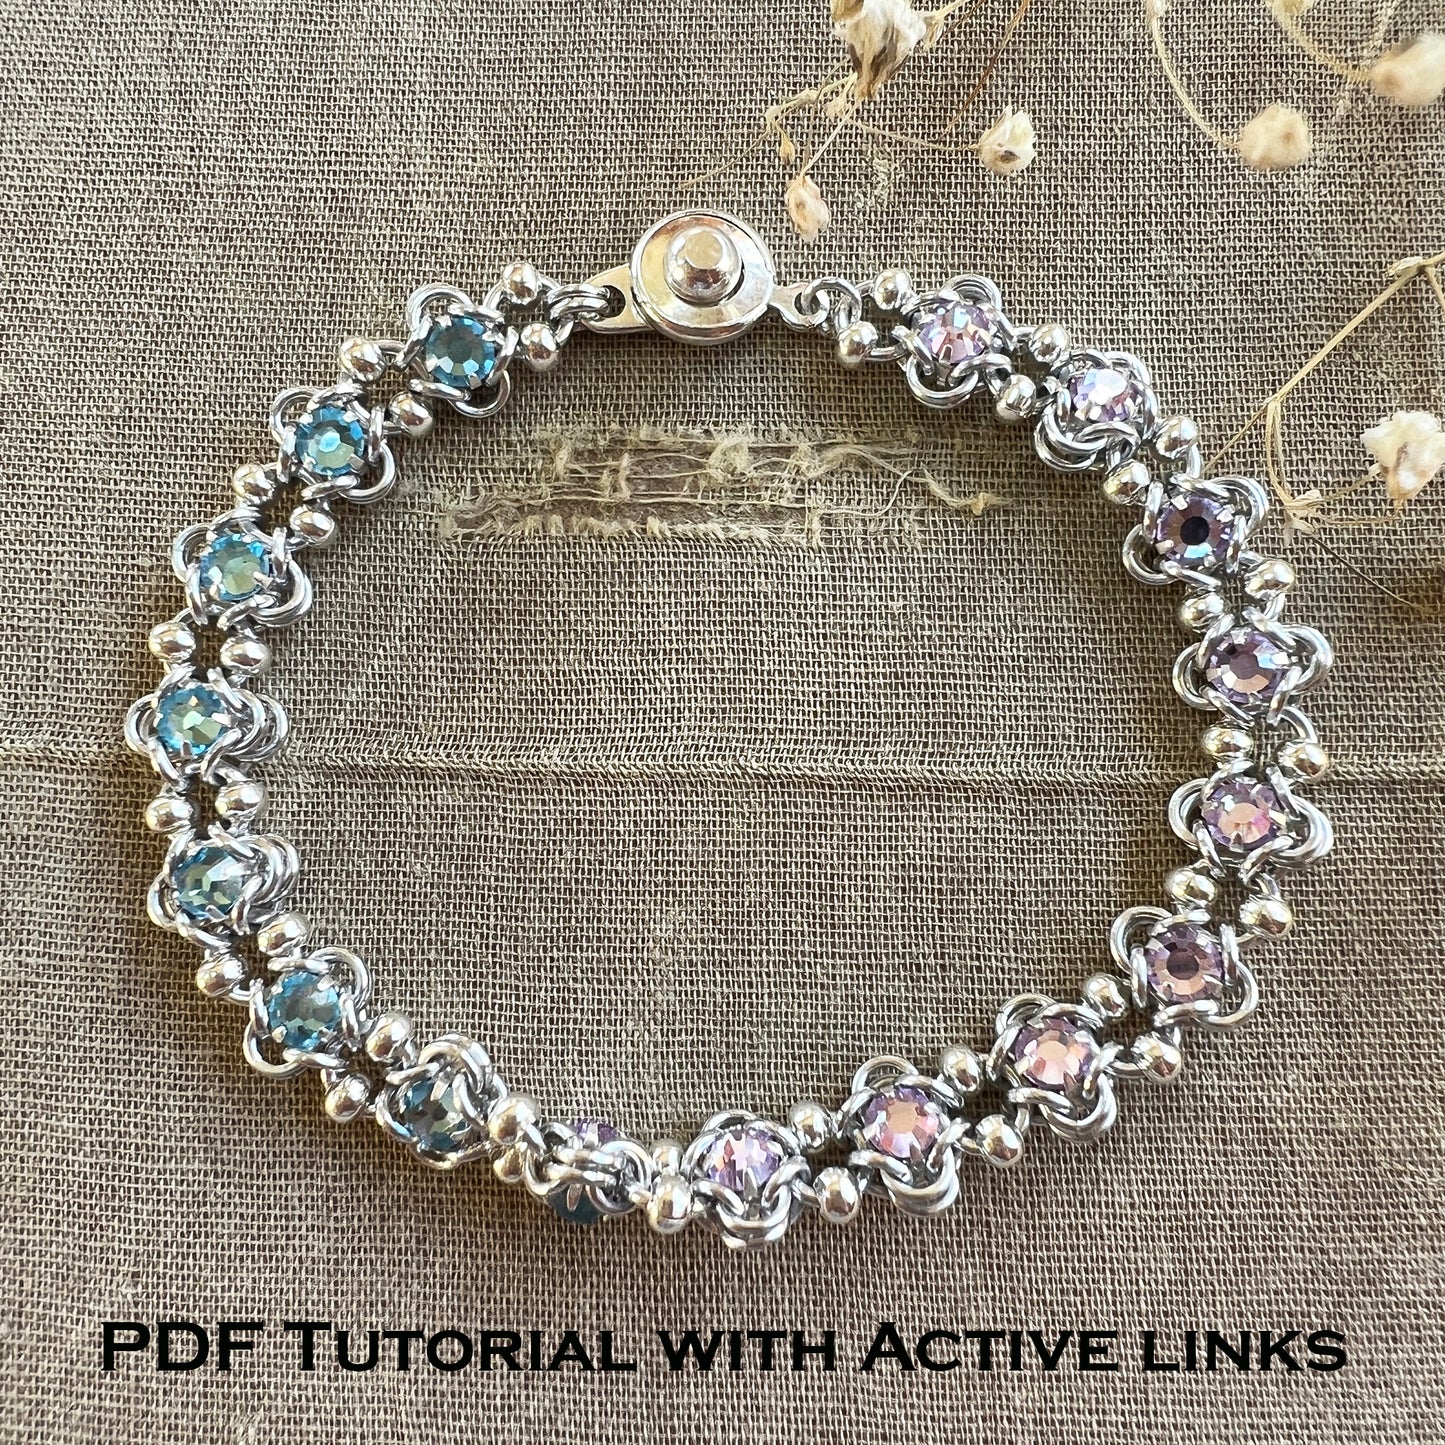 Reversible Rose Montee Beaded Bracelet PDF Tutorial & Video Class -no physical items included